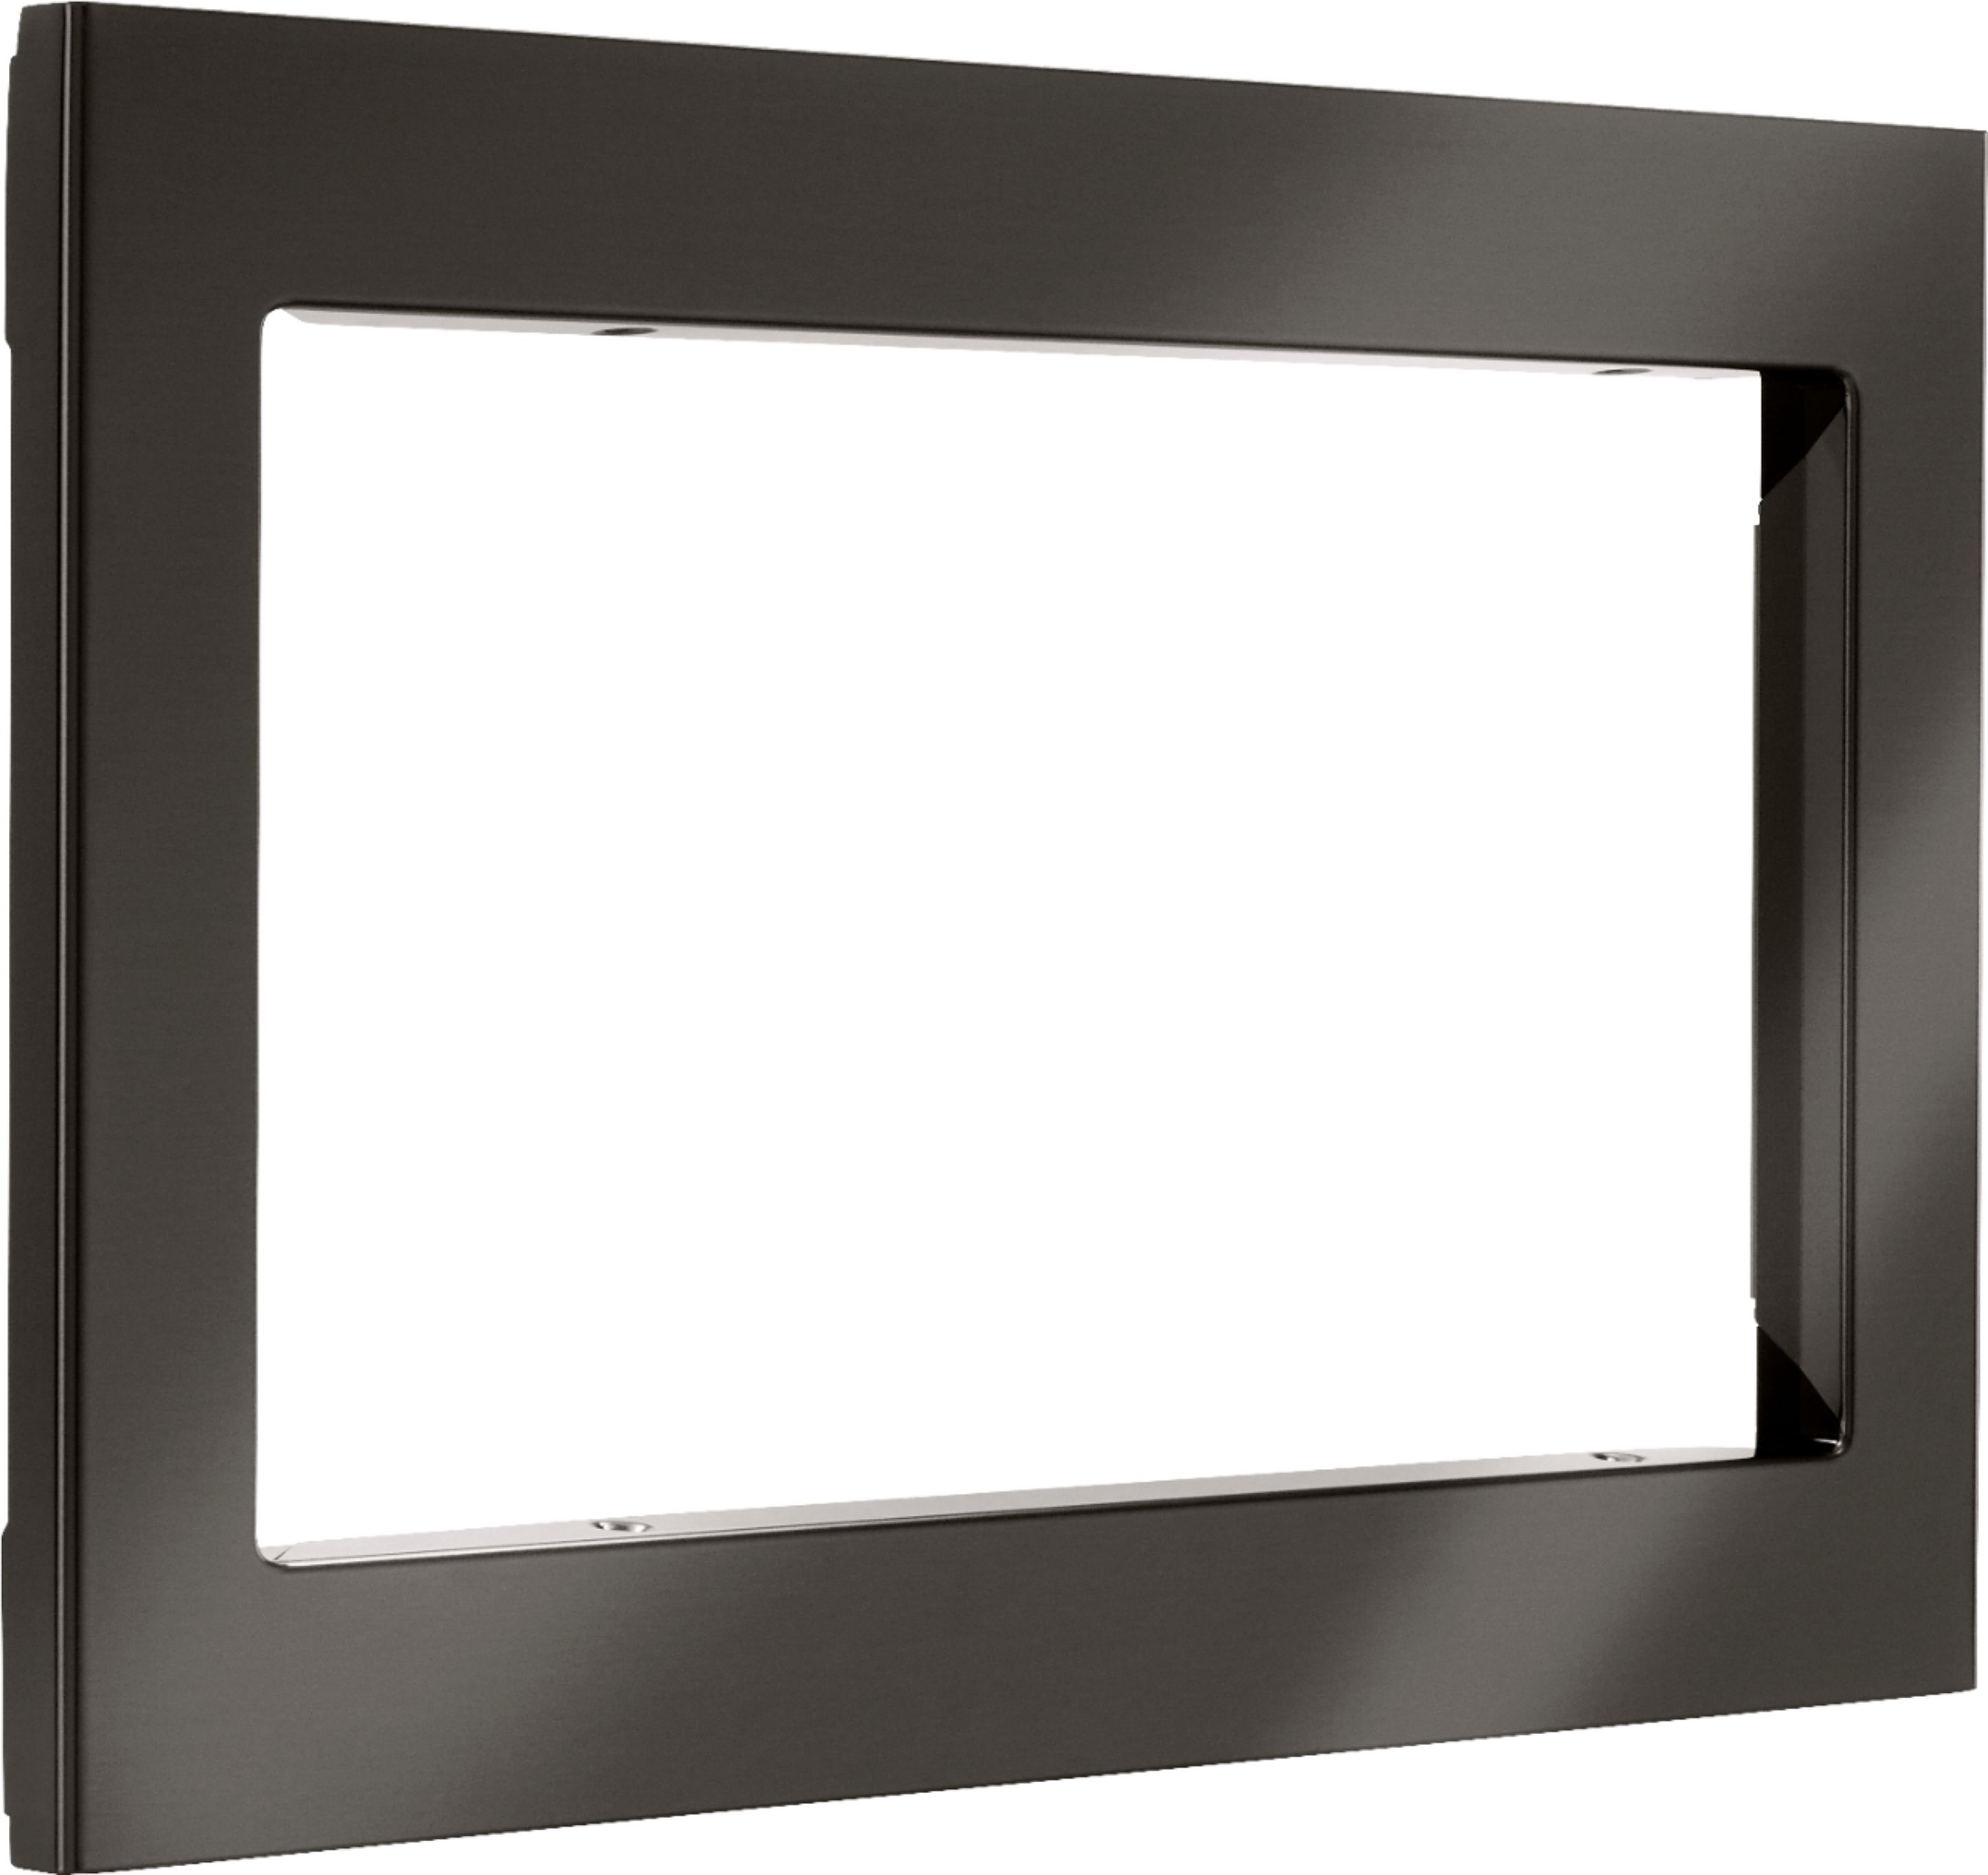 Angle View: 29.7" Trim Kit for LG Microwaves - Black Stainless Steel